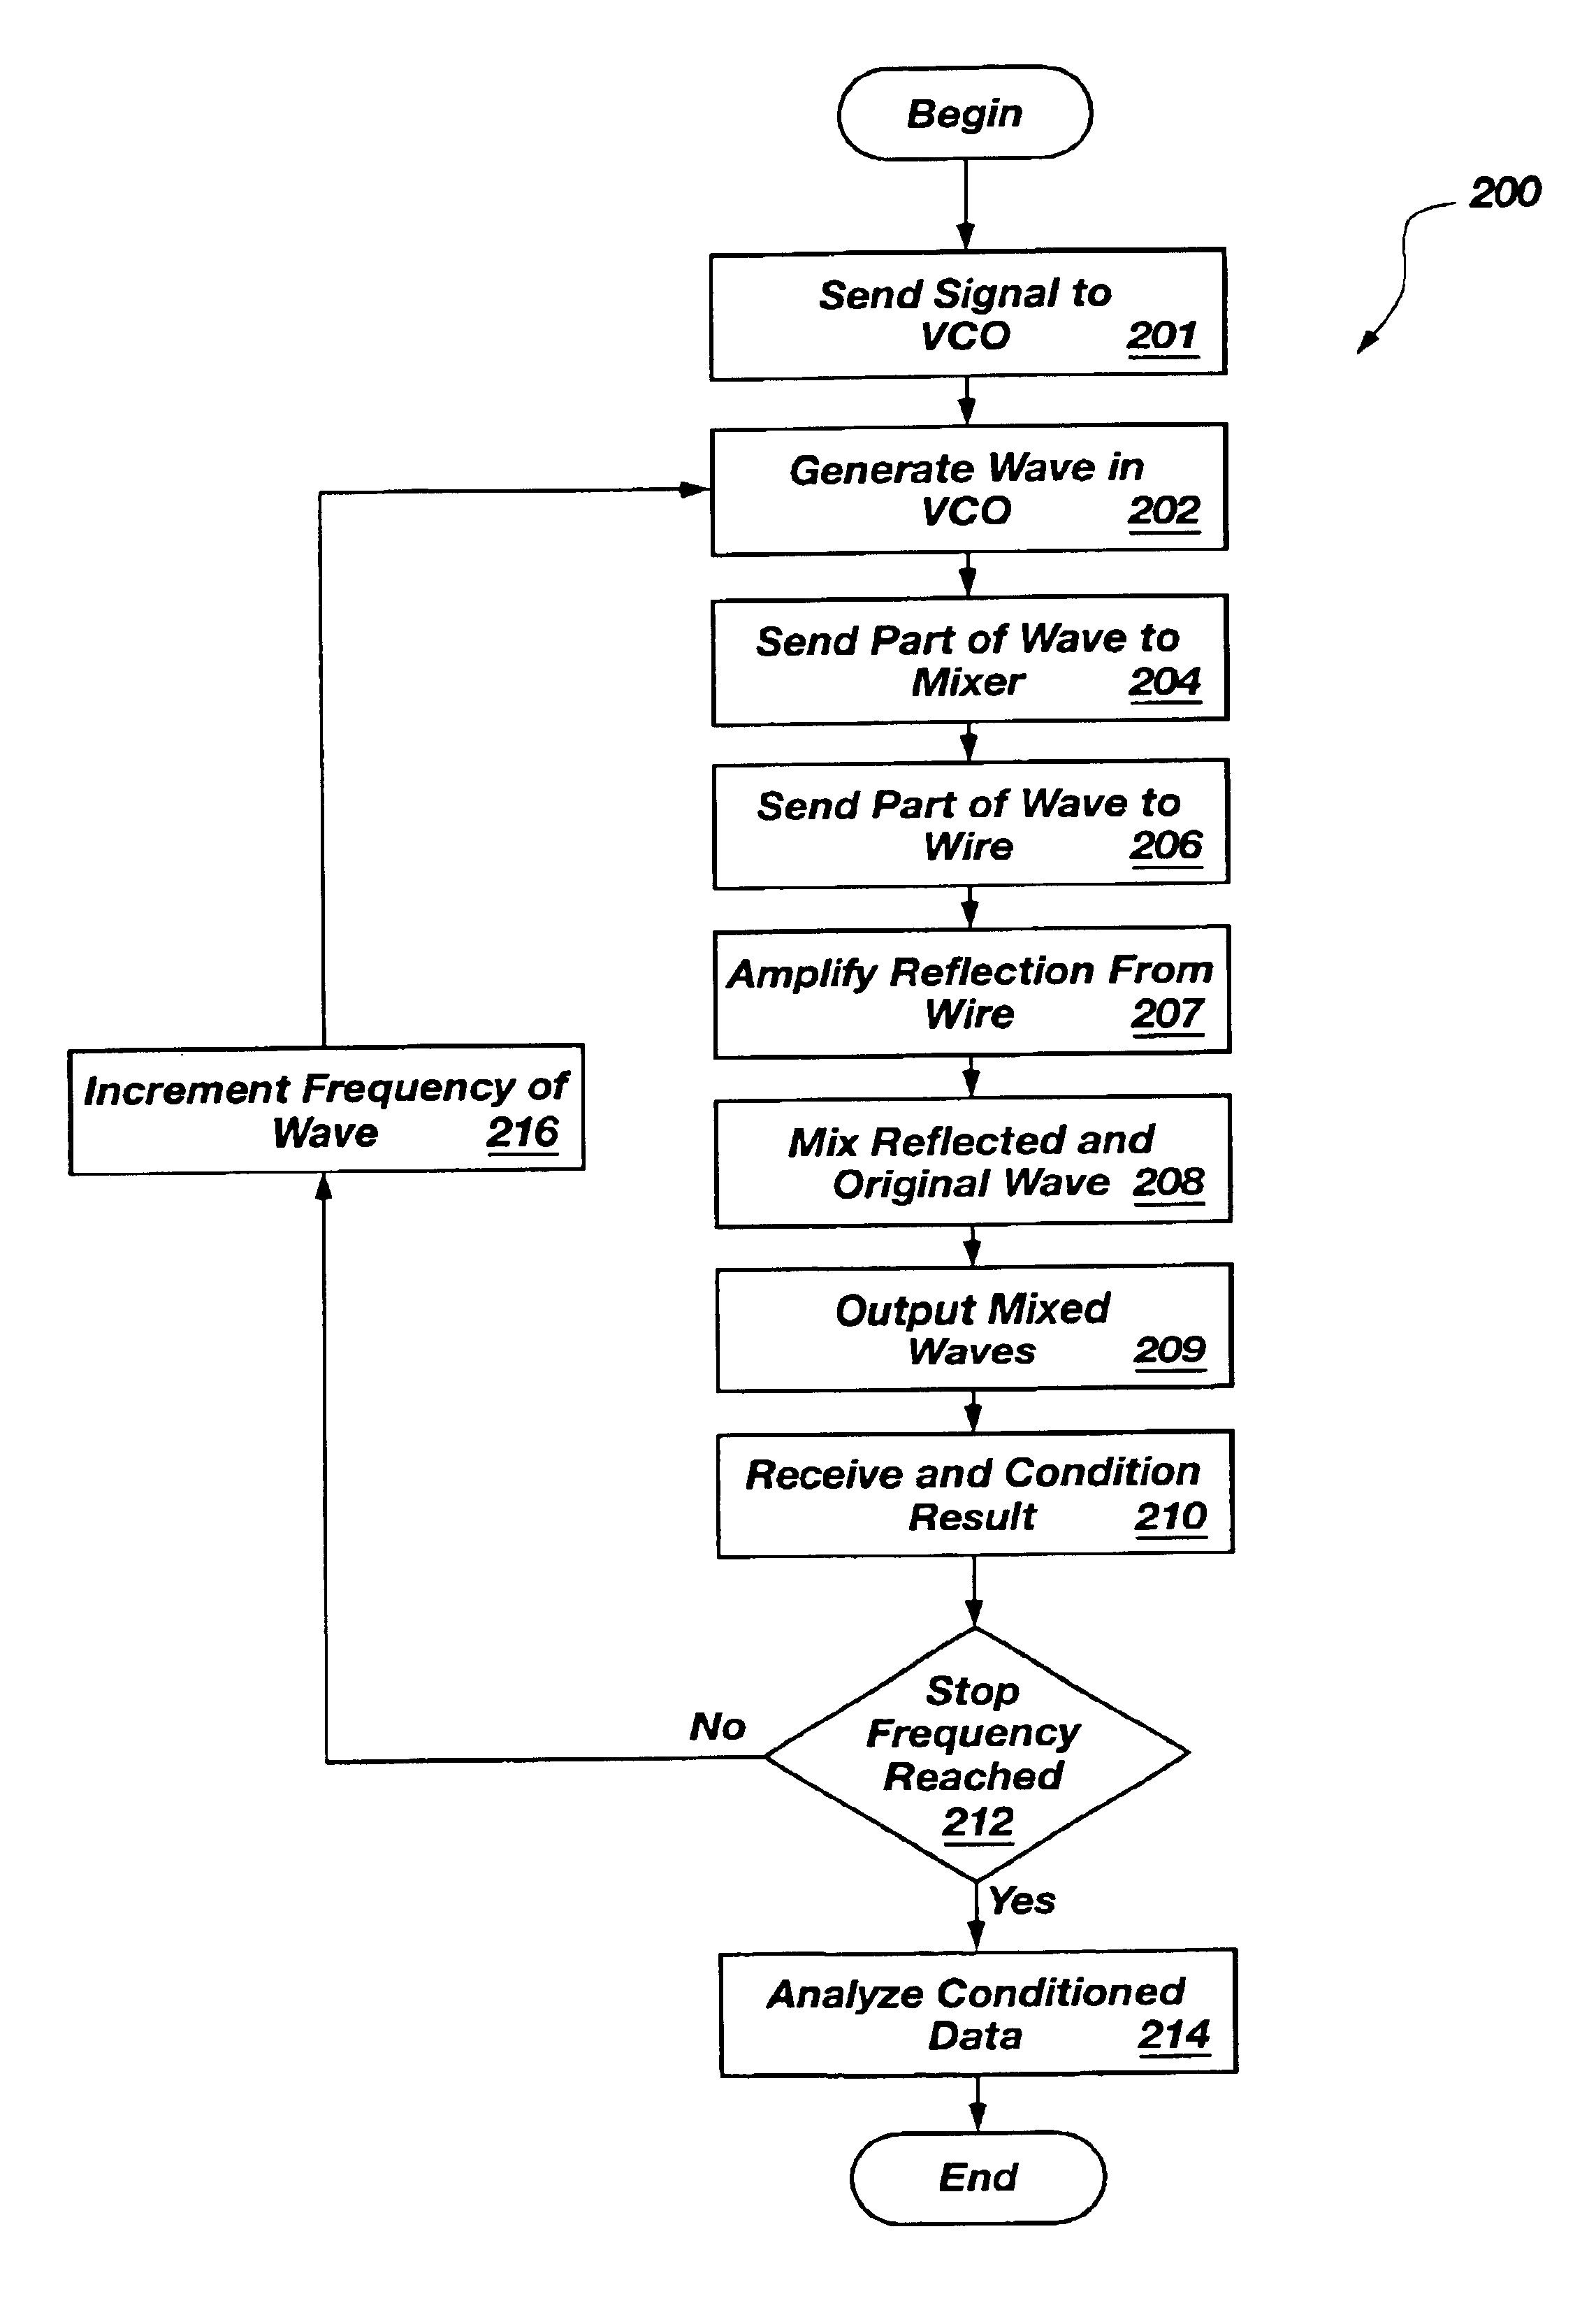 Frequency domain reflectometry system for testing wires and cables utilizing in-situ connectors, passive connectivity, cable fray detection, and live wire testing